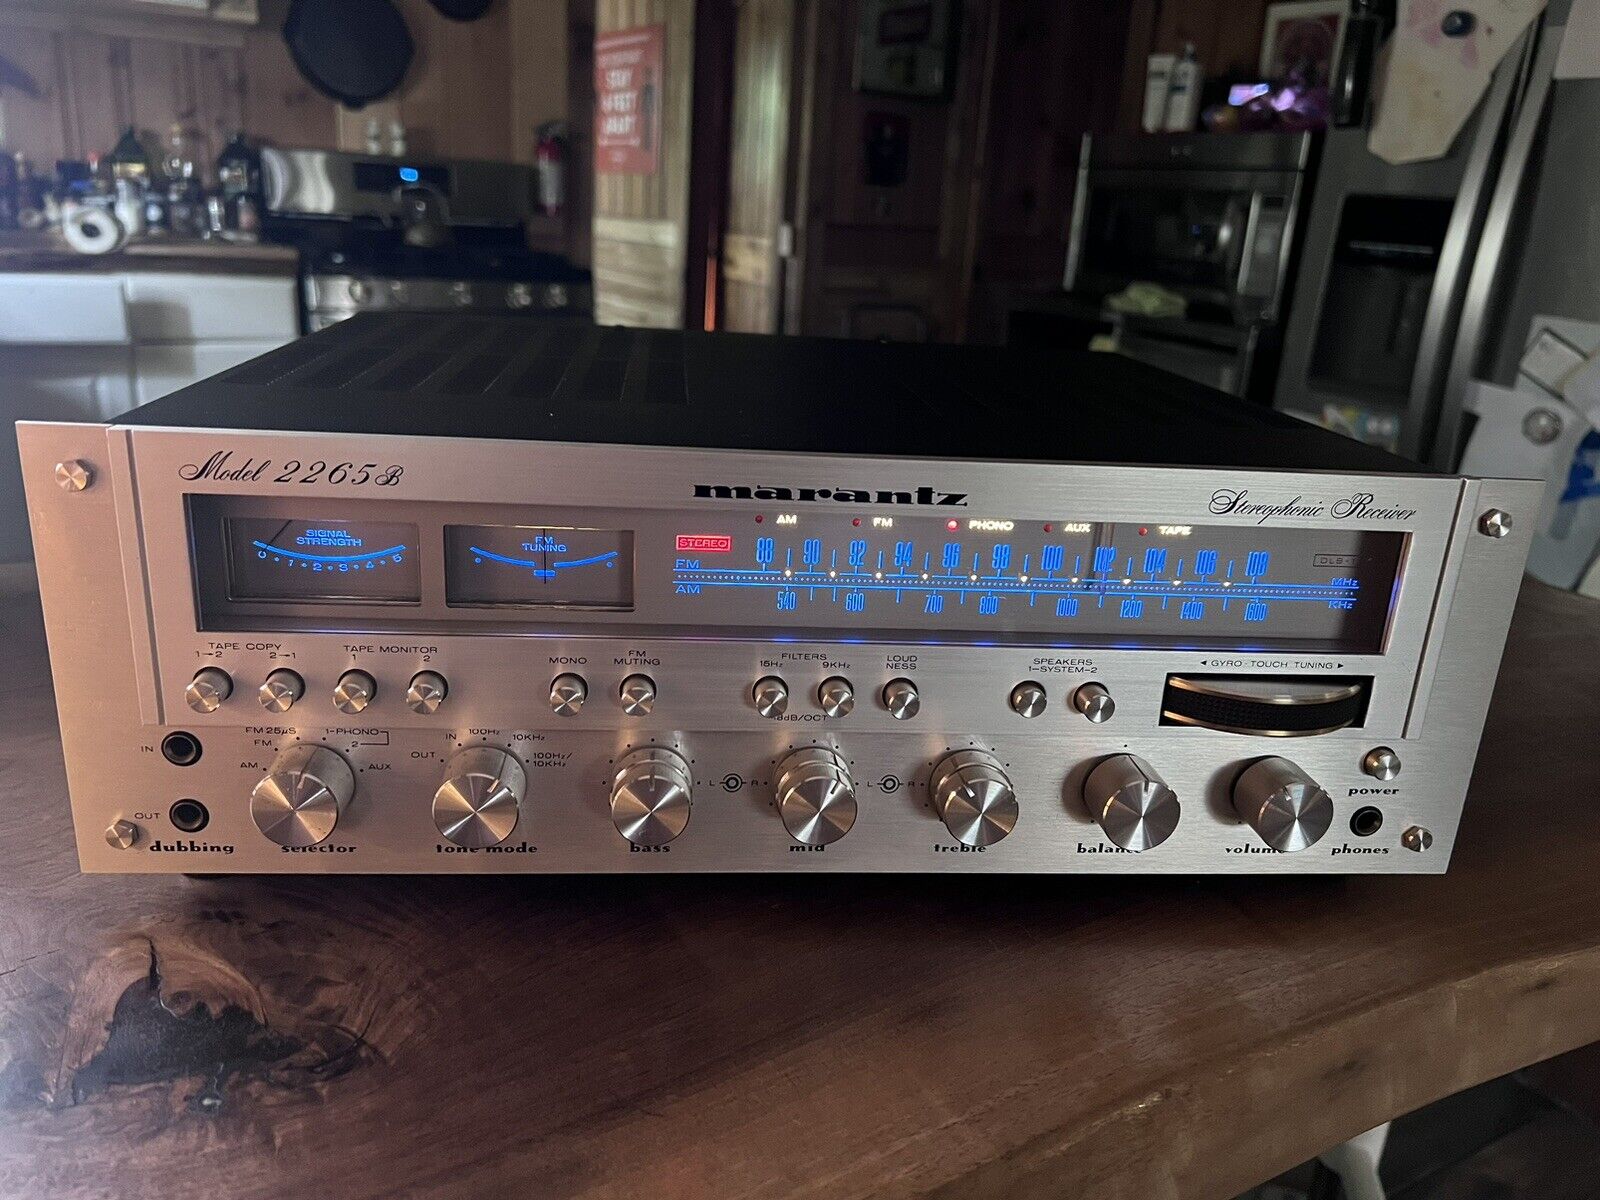 Exceptional Minty Marantz 2265B Professionally Maintained Receiver Sounds Great